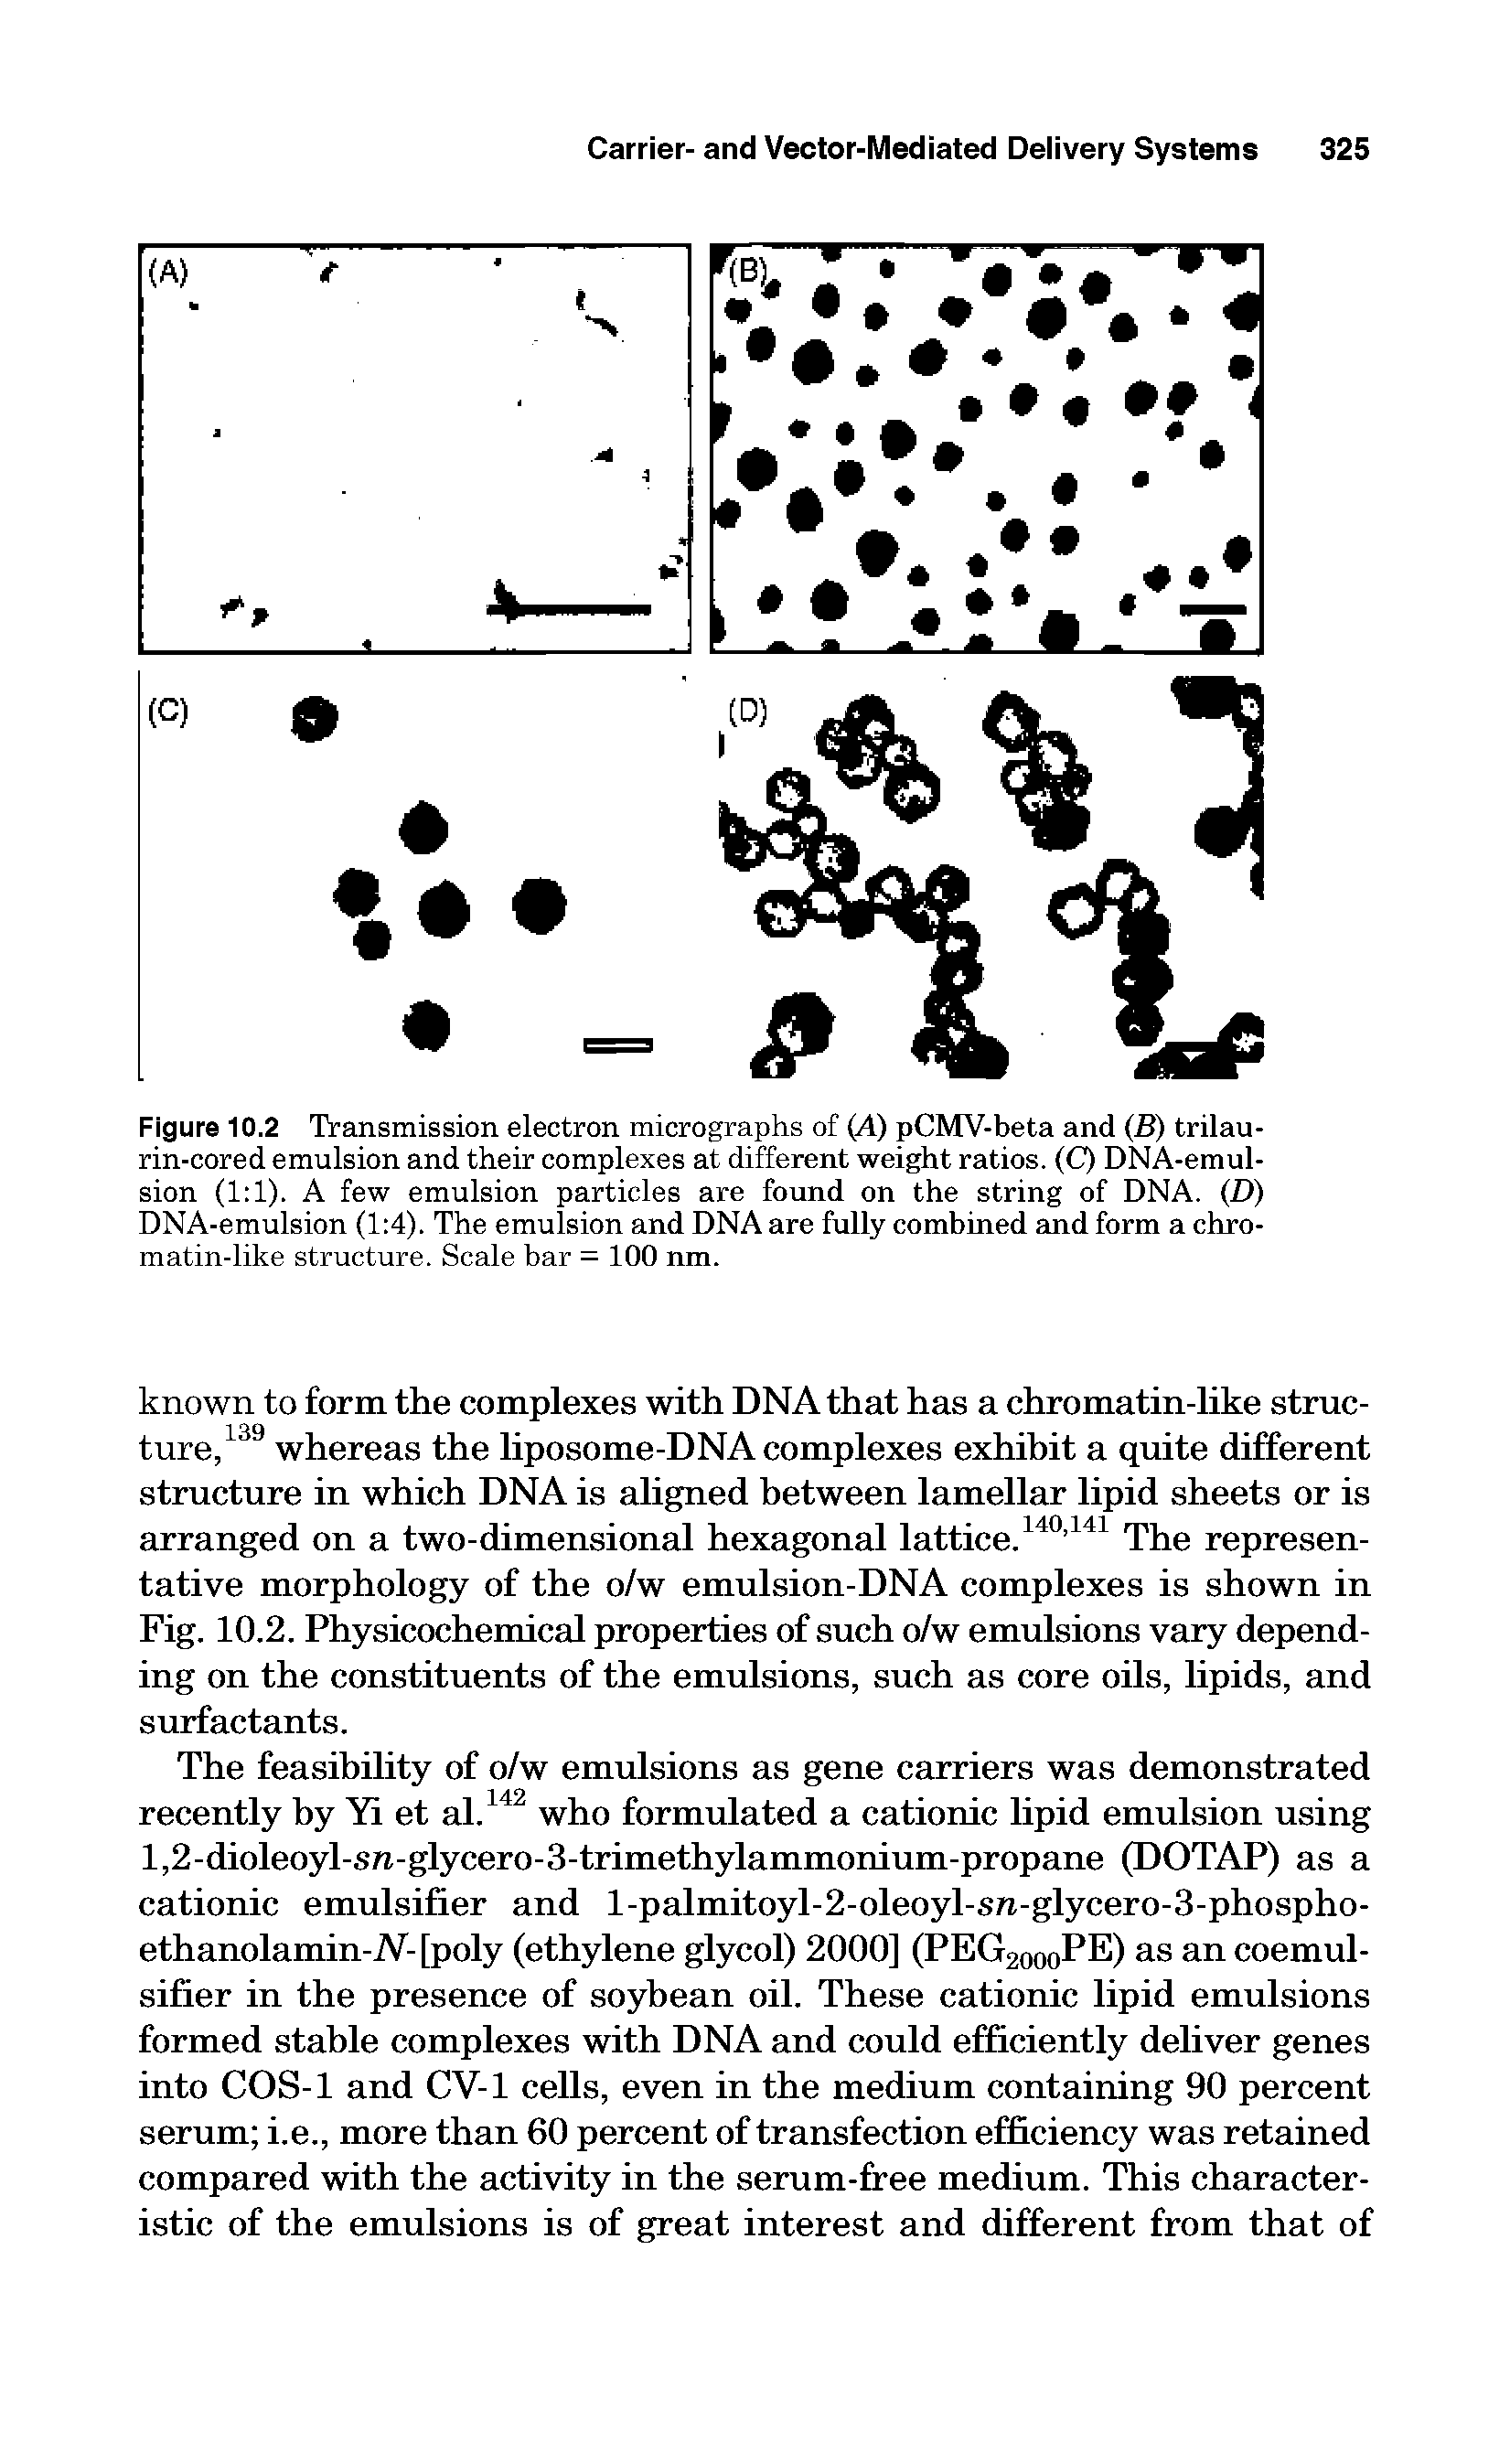 Figure 10.2 Transmission electron micrographs of (A) pCMV-beta and (B) trilau-rin-cored emulsion and their complexes at different weight ratios. (C) DNA-emul-sion (1 1). A few emulsion particles are found on the string of DNA. (D) DNA-emulsion (1 4). The emulsion and DNA are fully combined and form a chromatin-like structure. Scale bar = 100 nm.